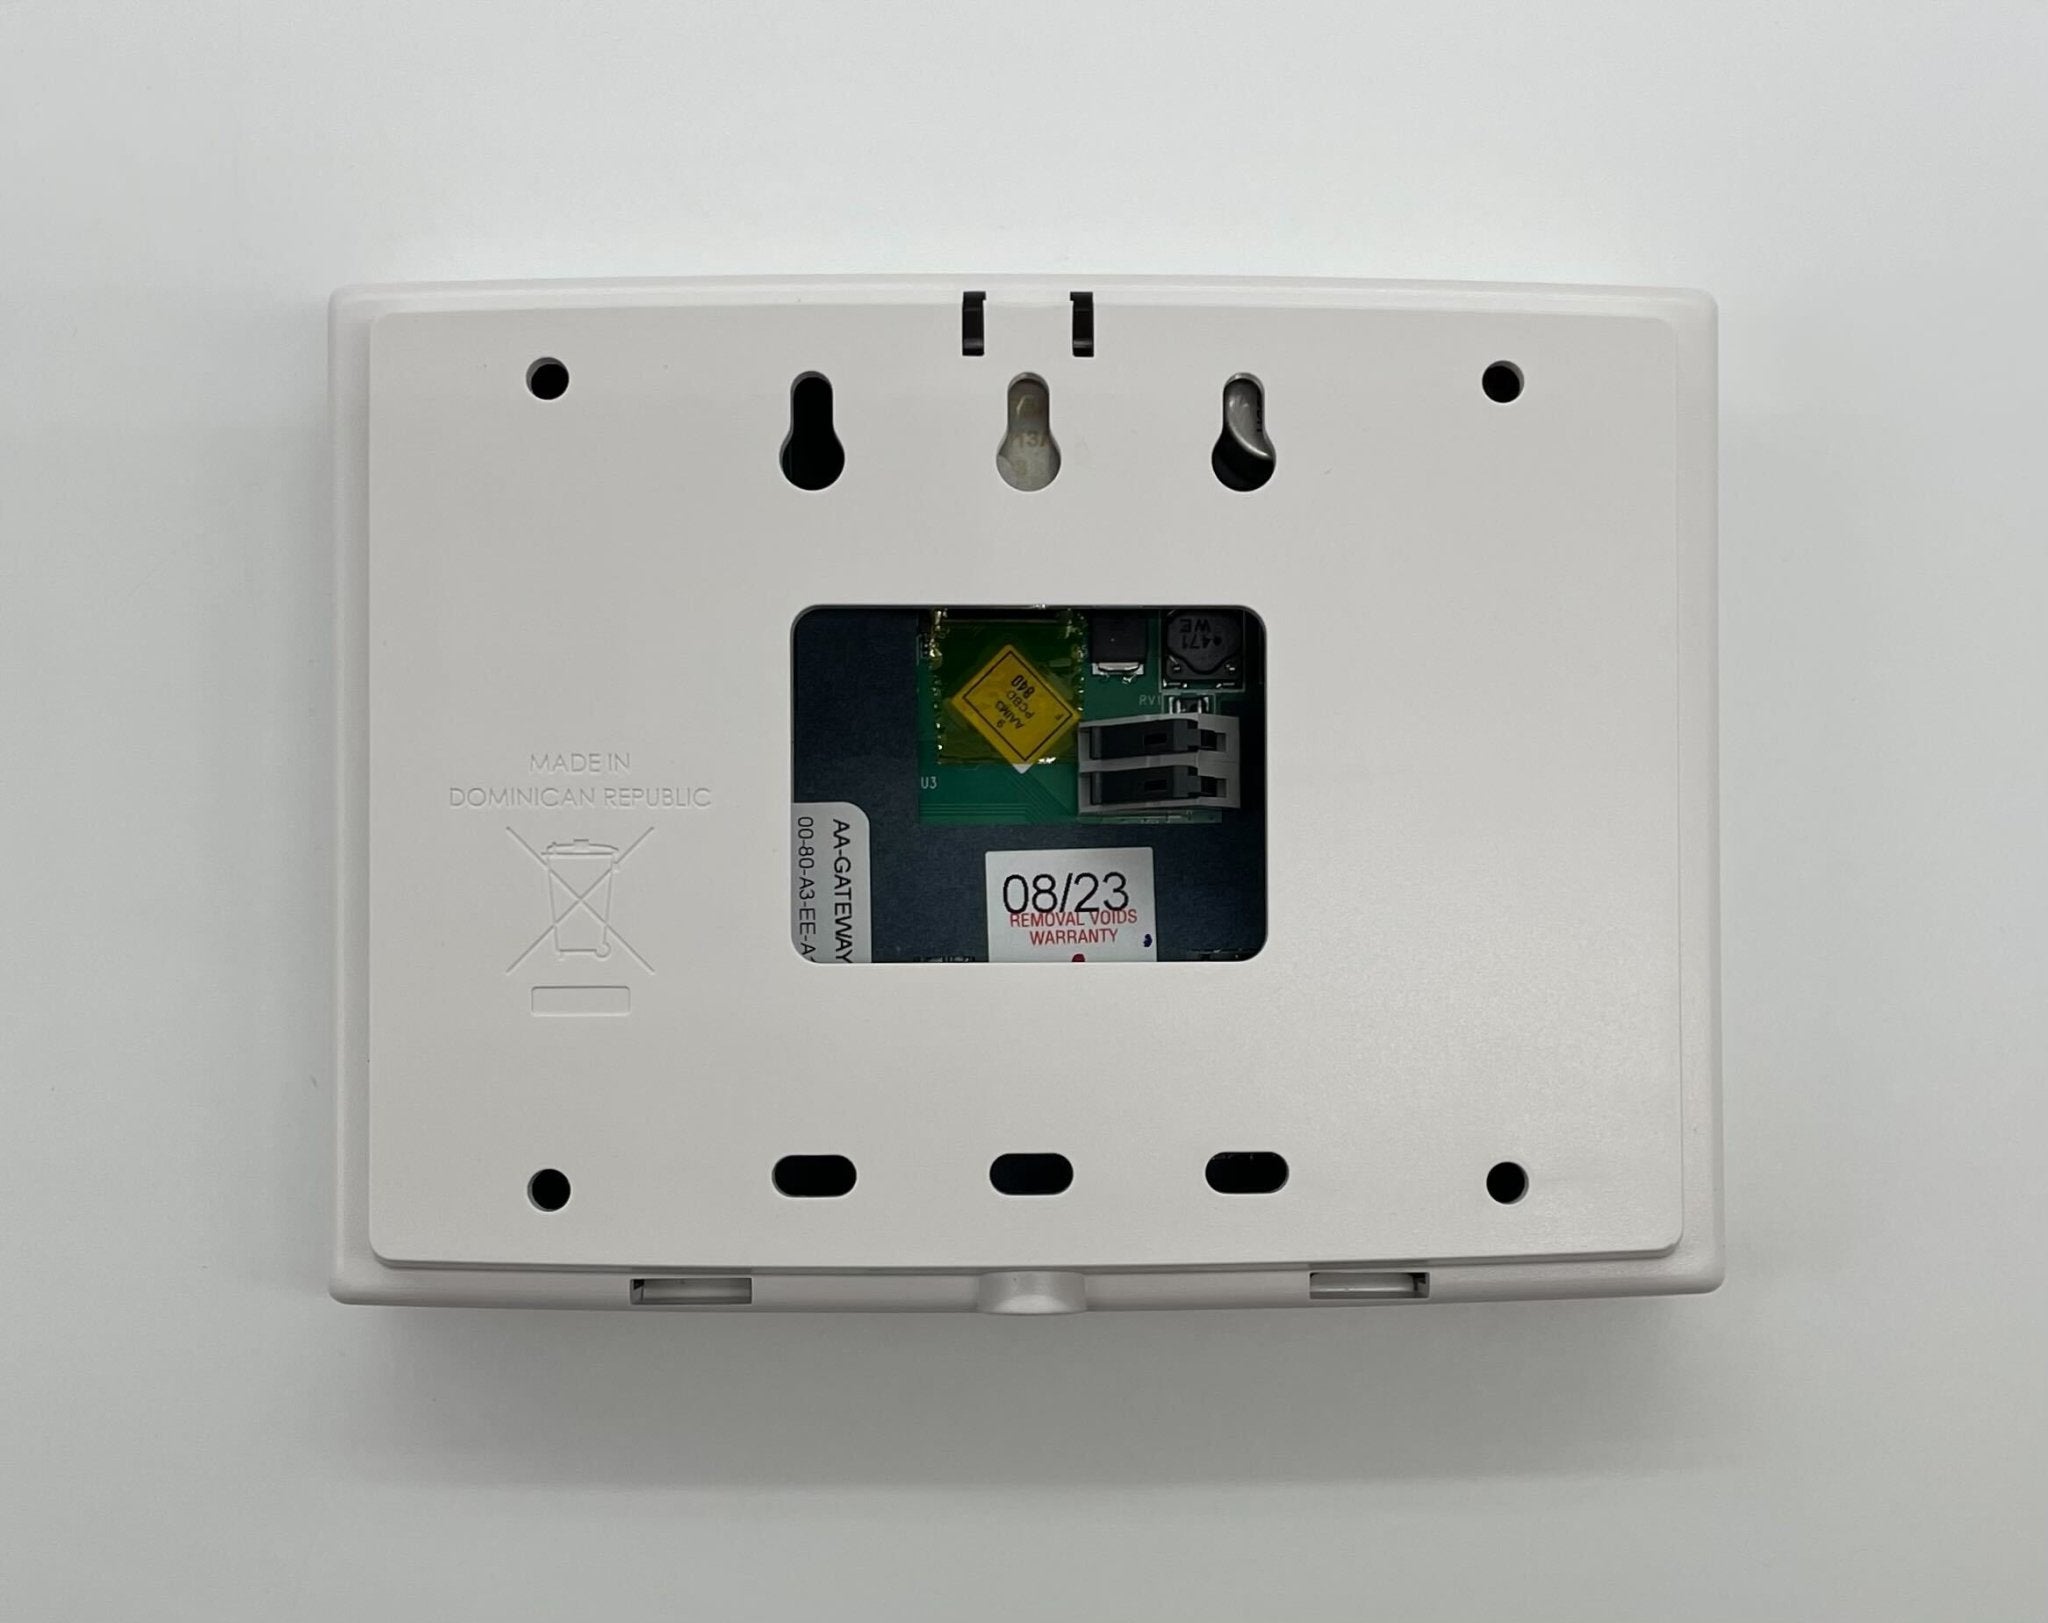 Napco AA-KIT1A - The Fire Alarm Supplier